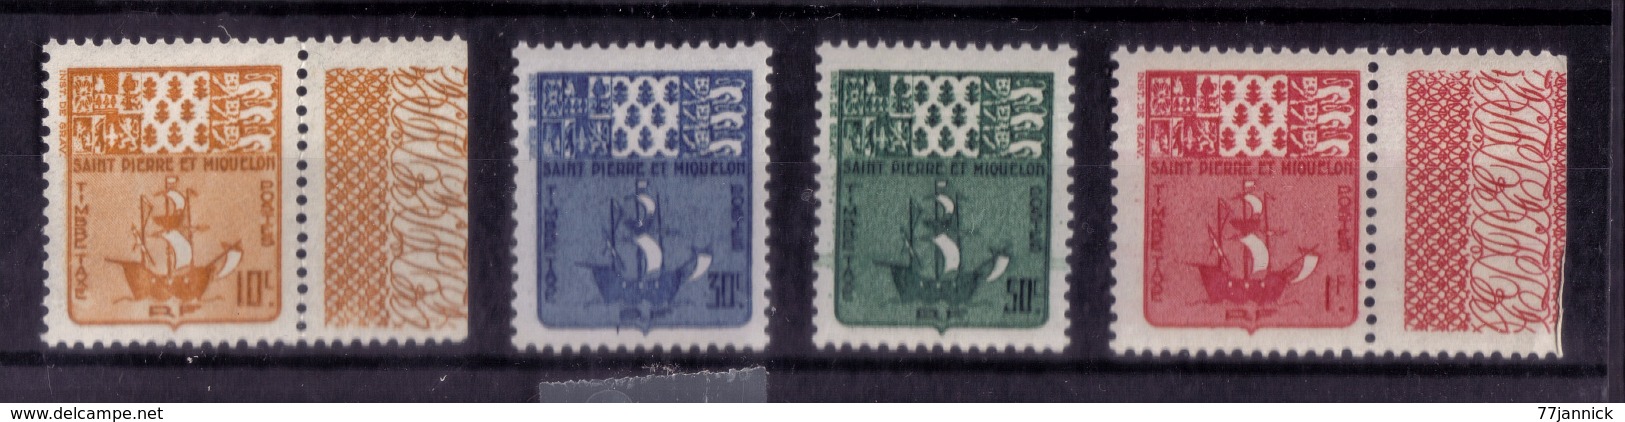 TIMBRE TAXE N* 67/68/69/70 NEUF** - Postage Due